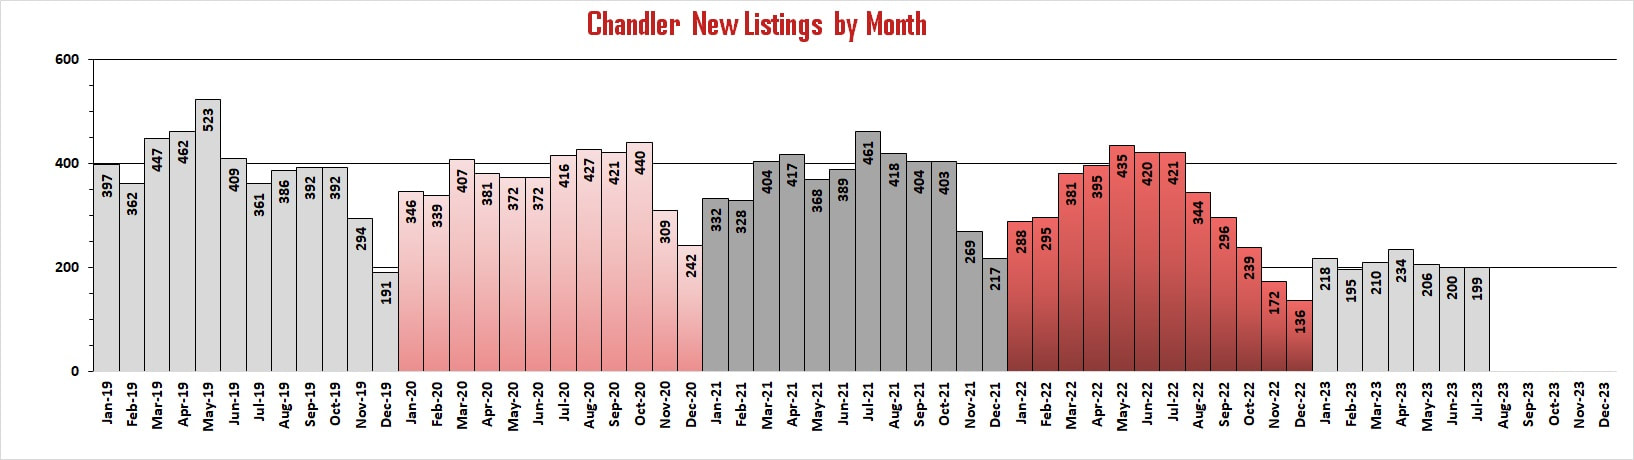 Housing Market Reports Chandler, AZ - New Listings by Month | Troy Erickson Realtor